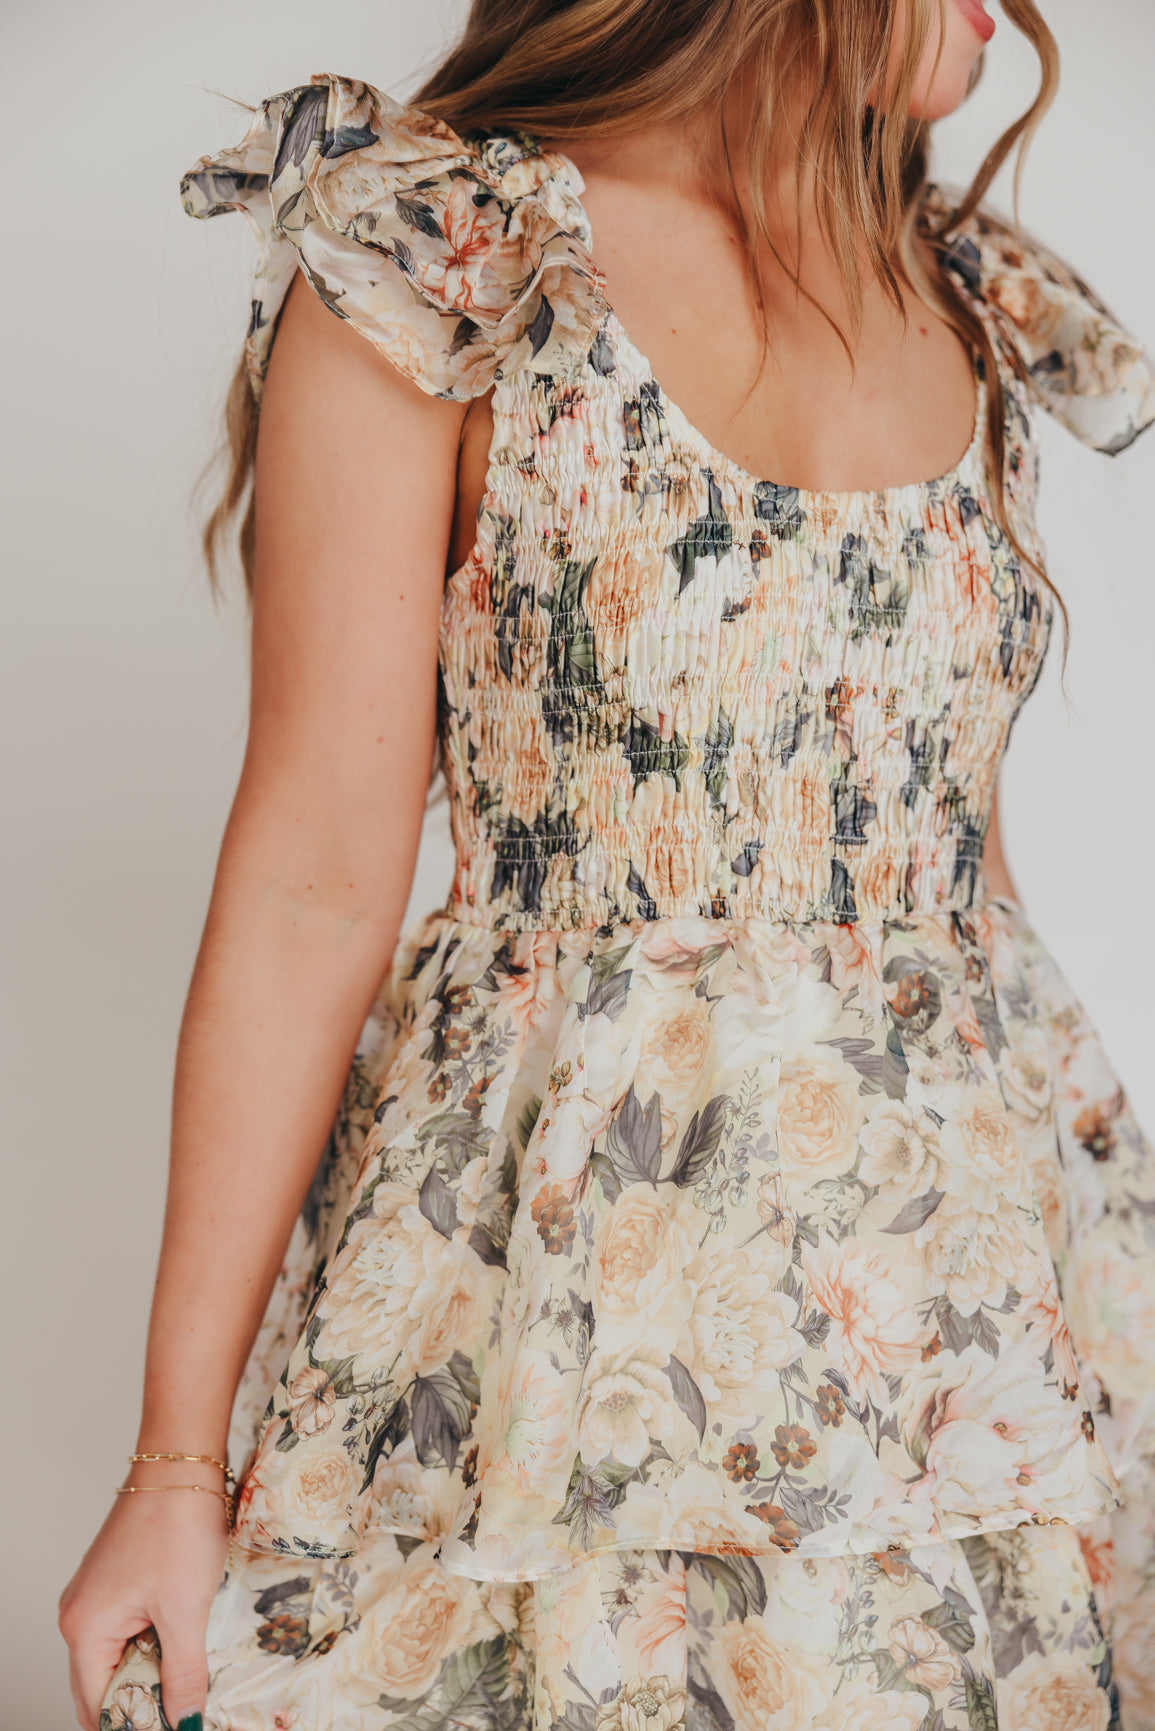 Forever & Always Midi Dress in Champagne Floral - Inclusive Sizing (S-3XL)